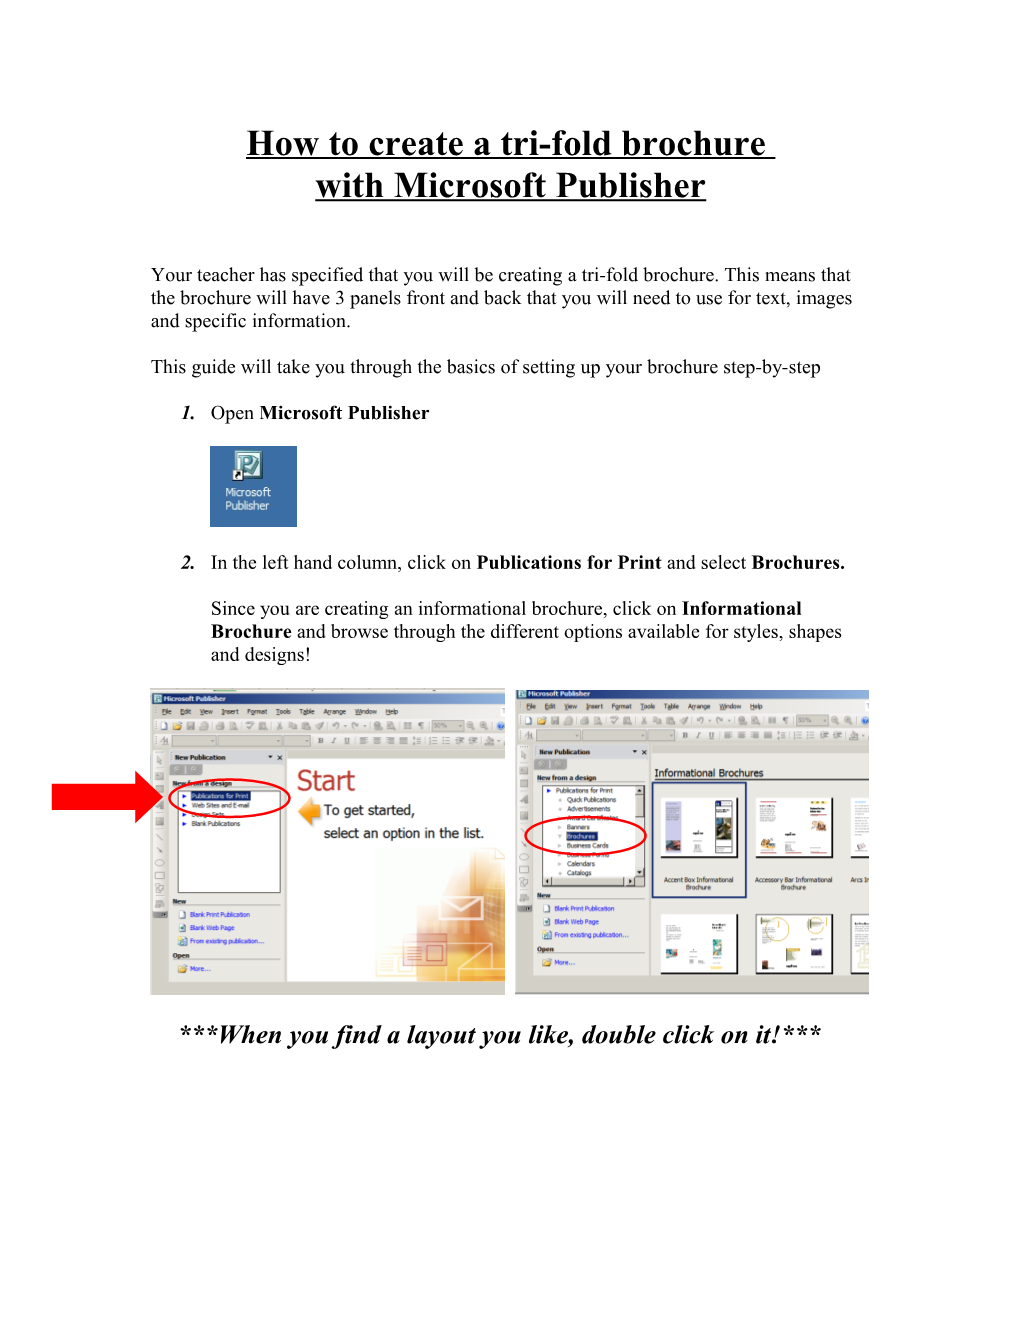 How to Create a Brochure in Publisher